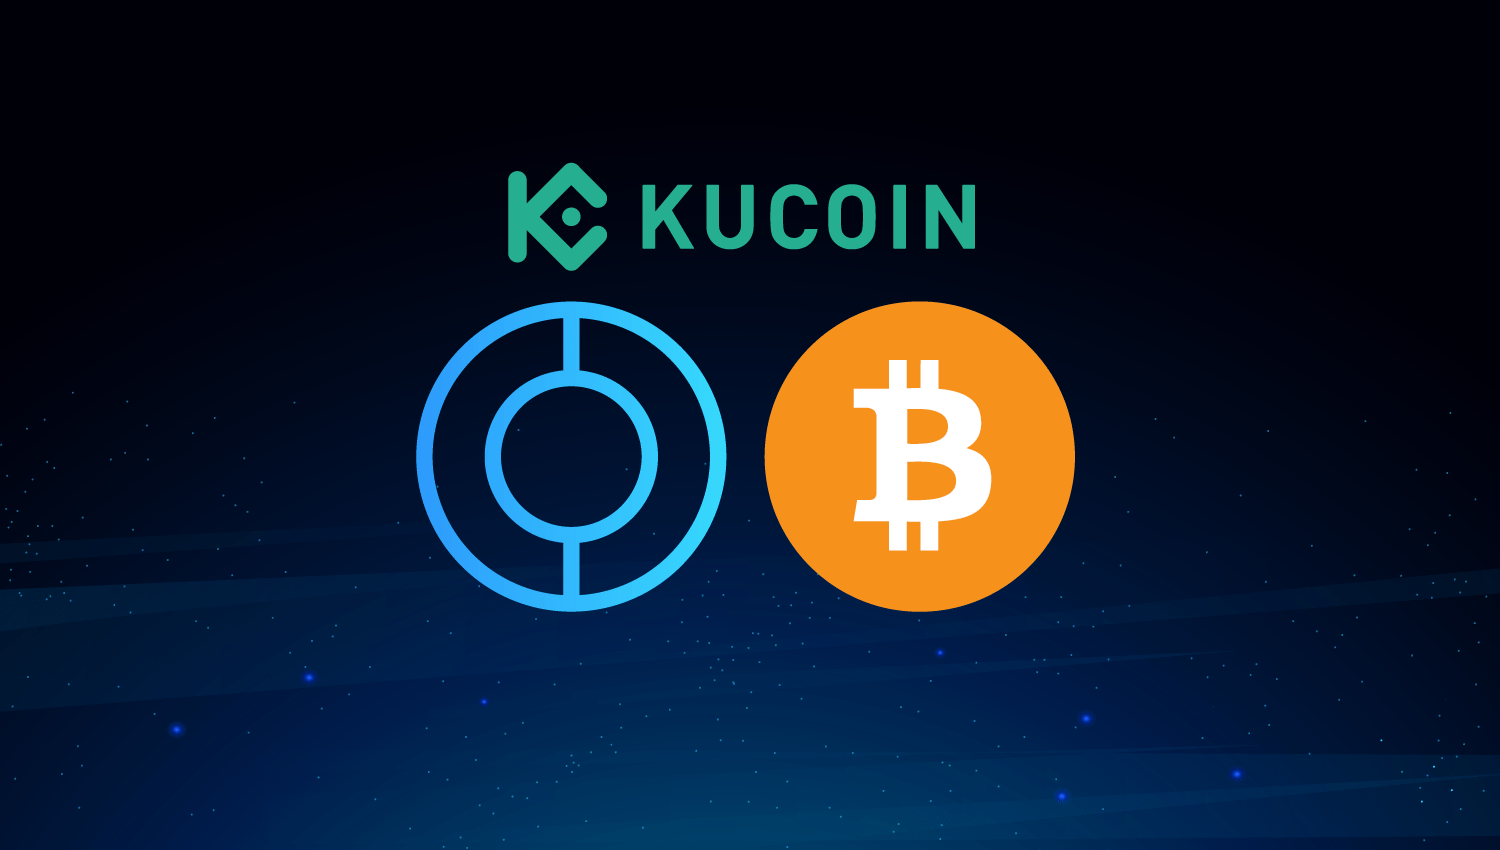 KuCoin is adding the CUDOS/BTC trading pair!